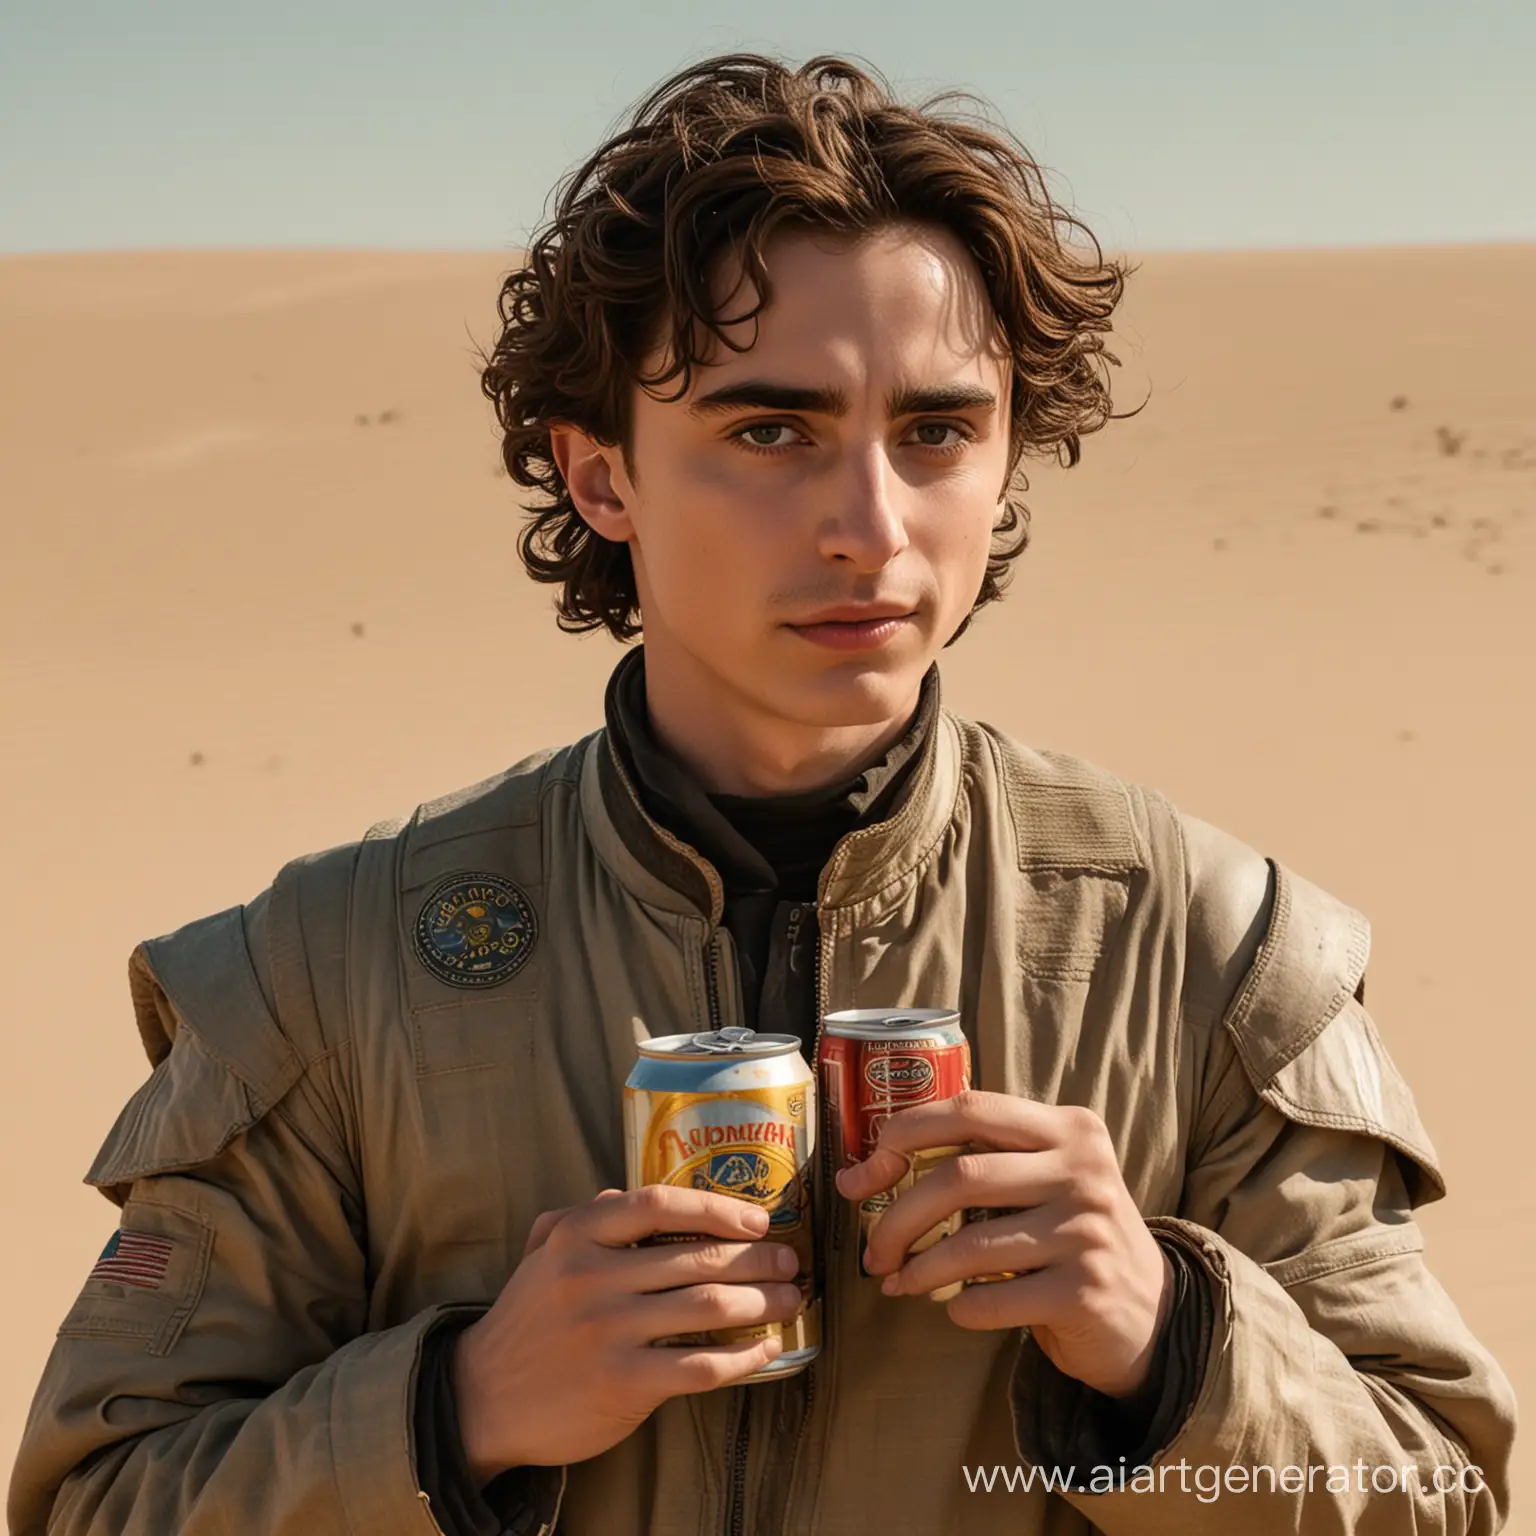 Timothe-Chalamet-Dune-Character-with-Beer-Can